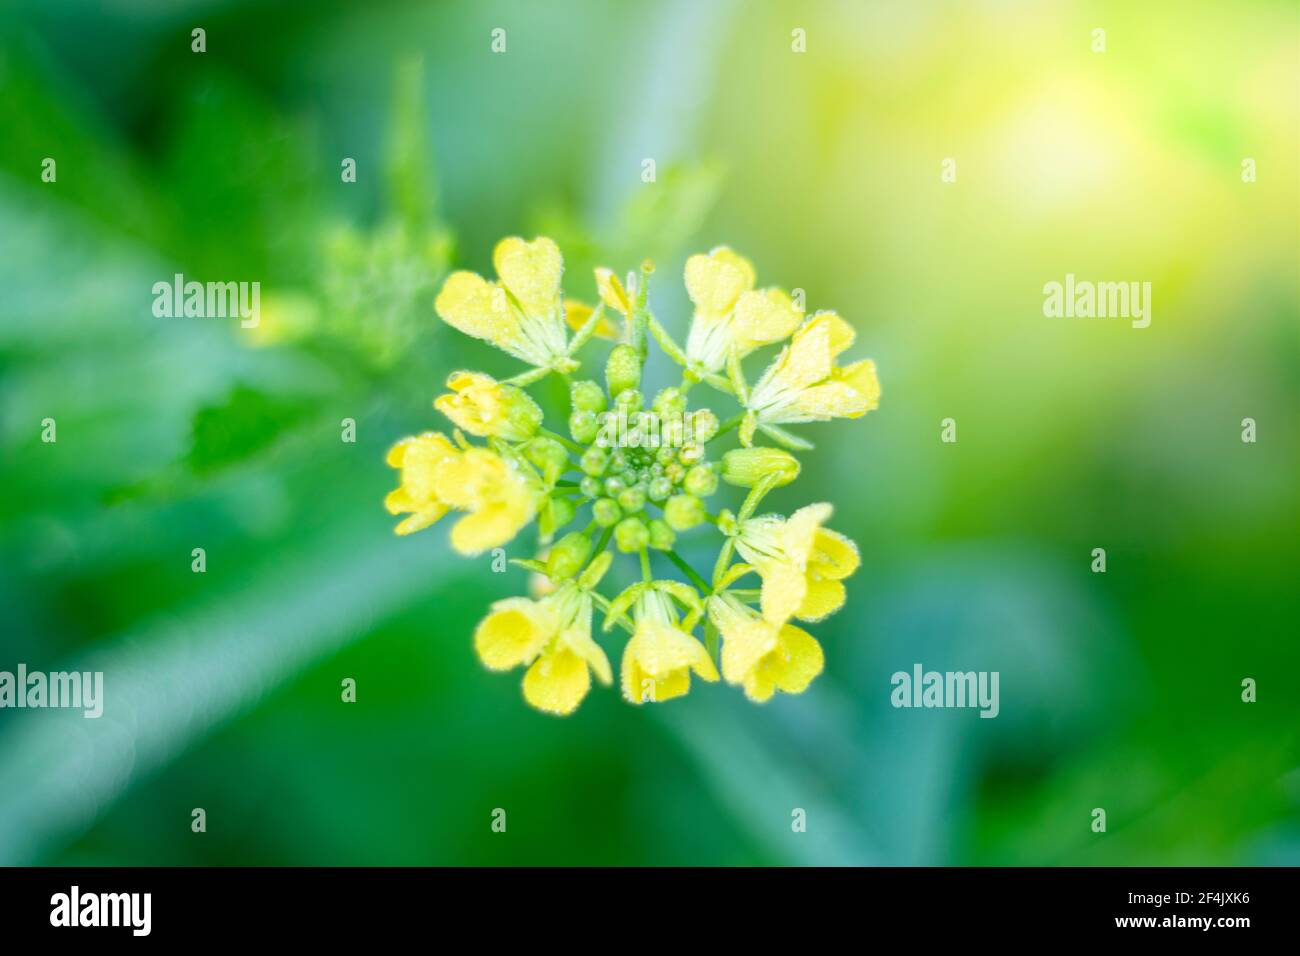 the yellow ripe mustered flowers with plant growing together in farm Stock Photo